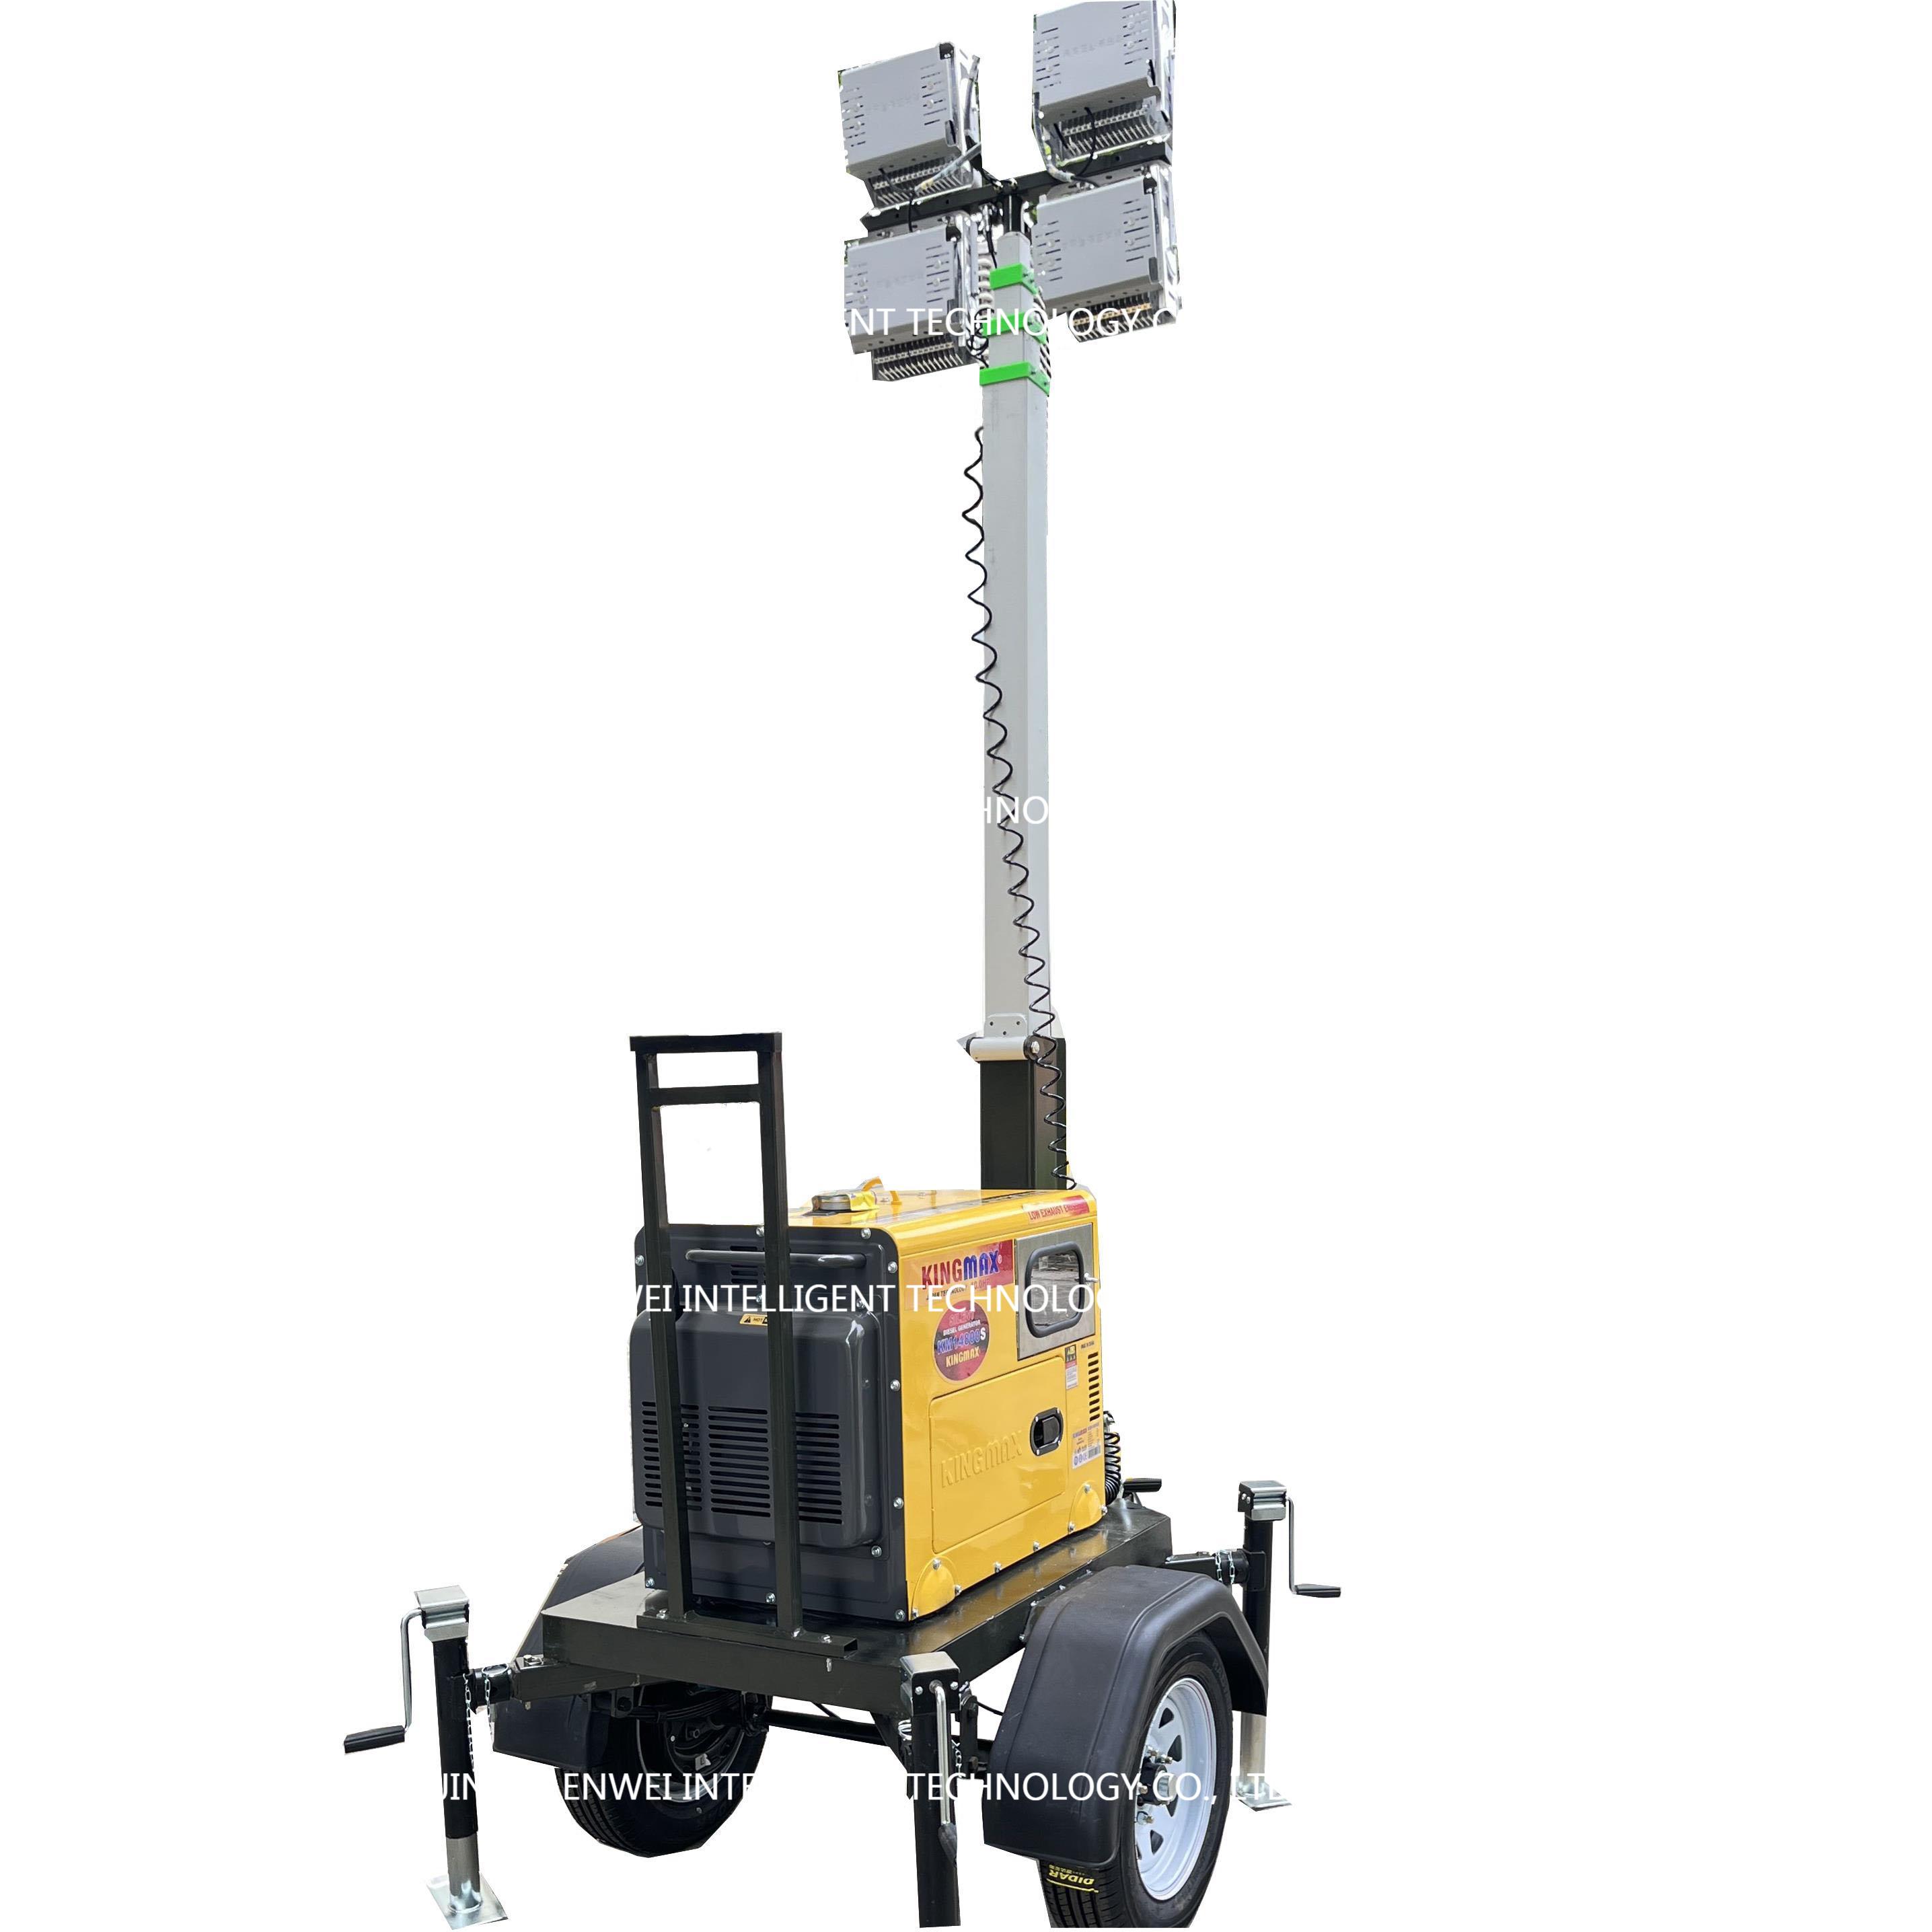 4000W 6000W light source 10 kw air cooled diesel engine towable light towers for emergency